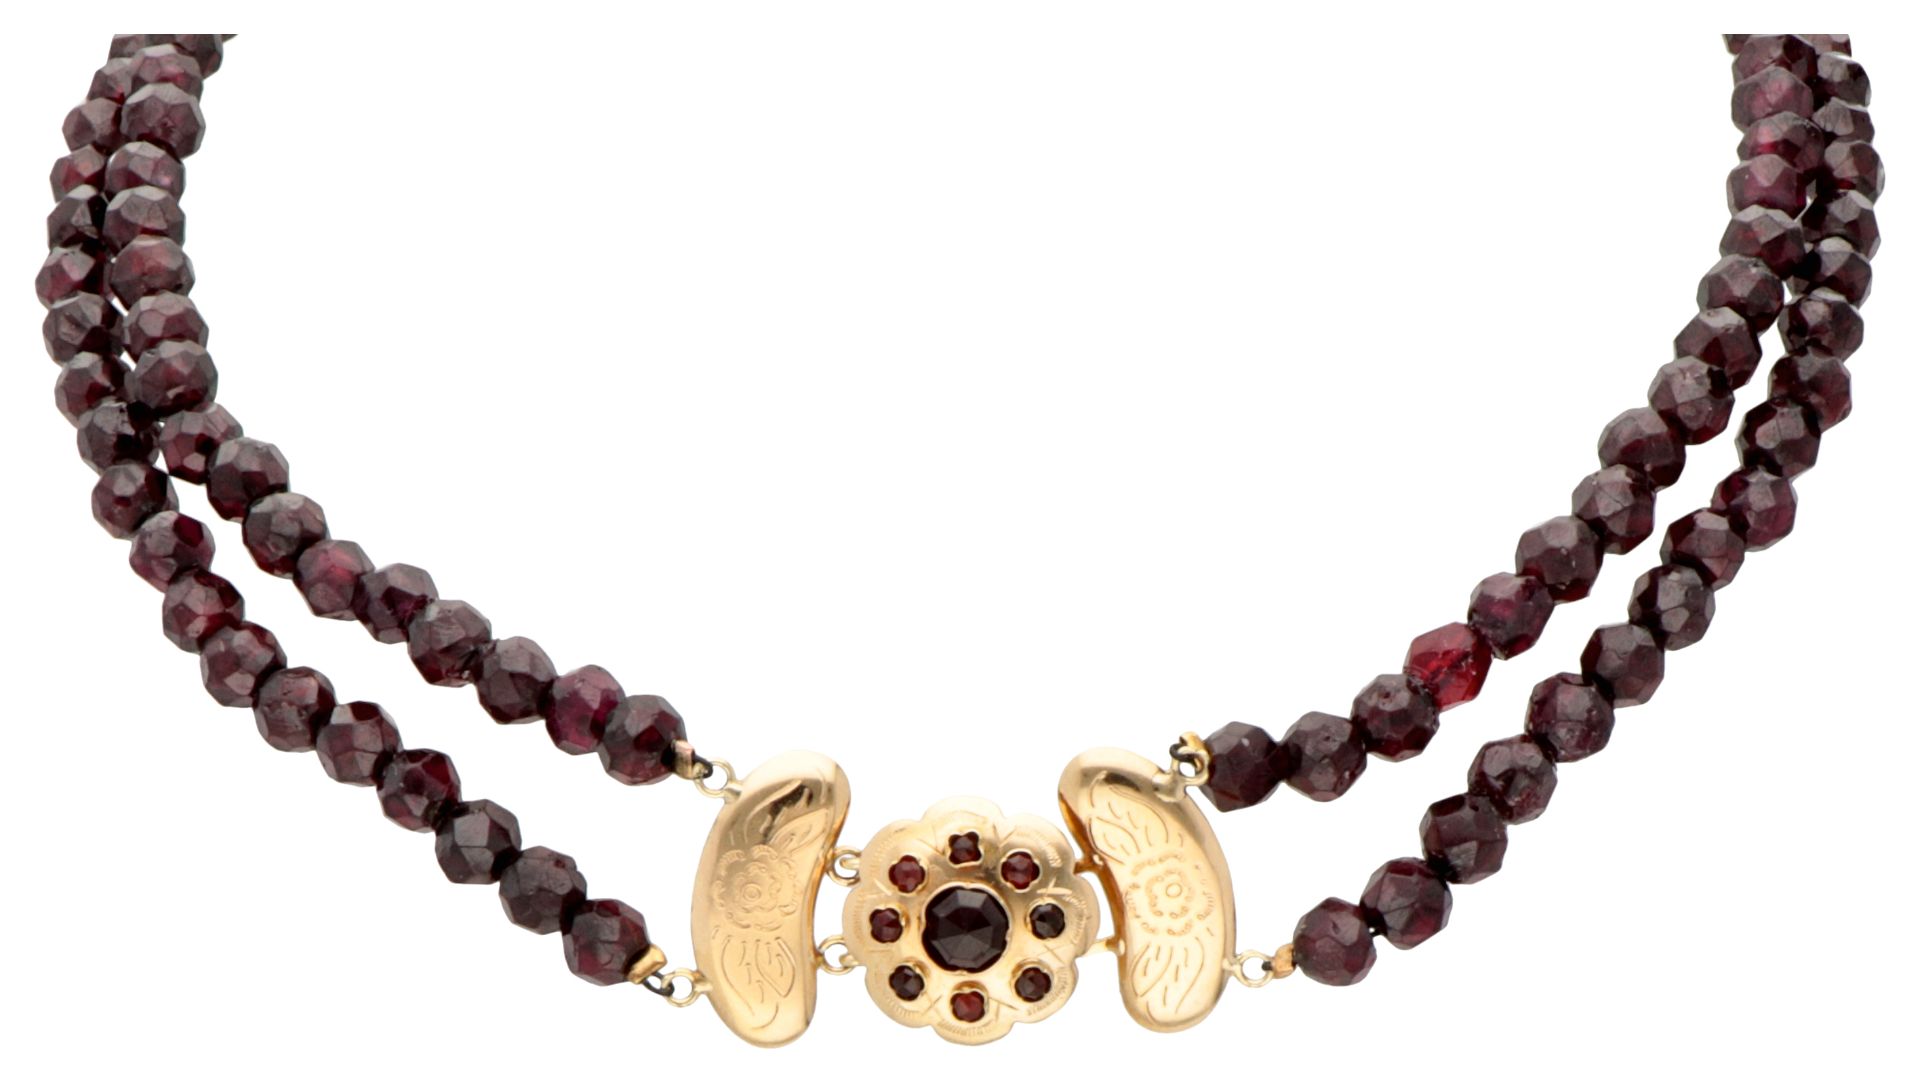 14K Yellow gold two-row garnet necklace.